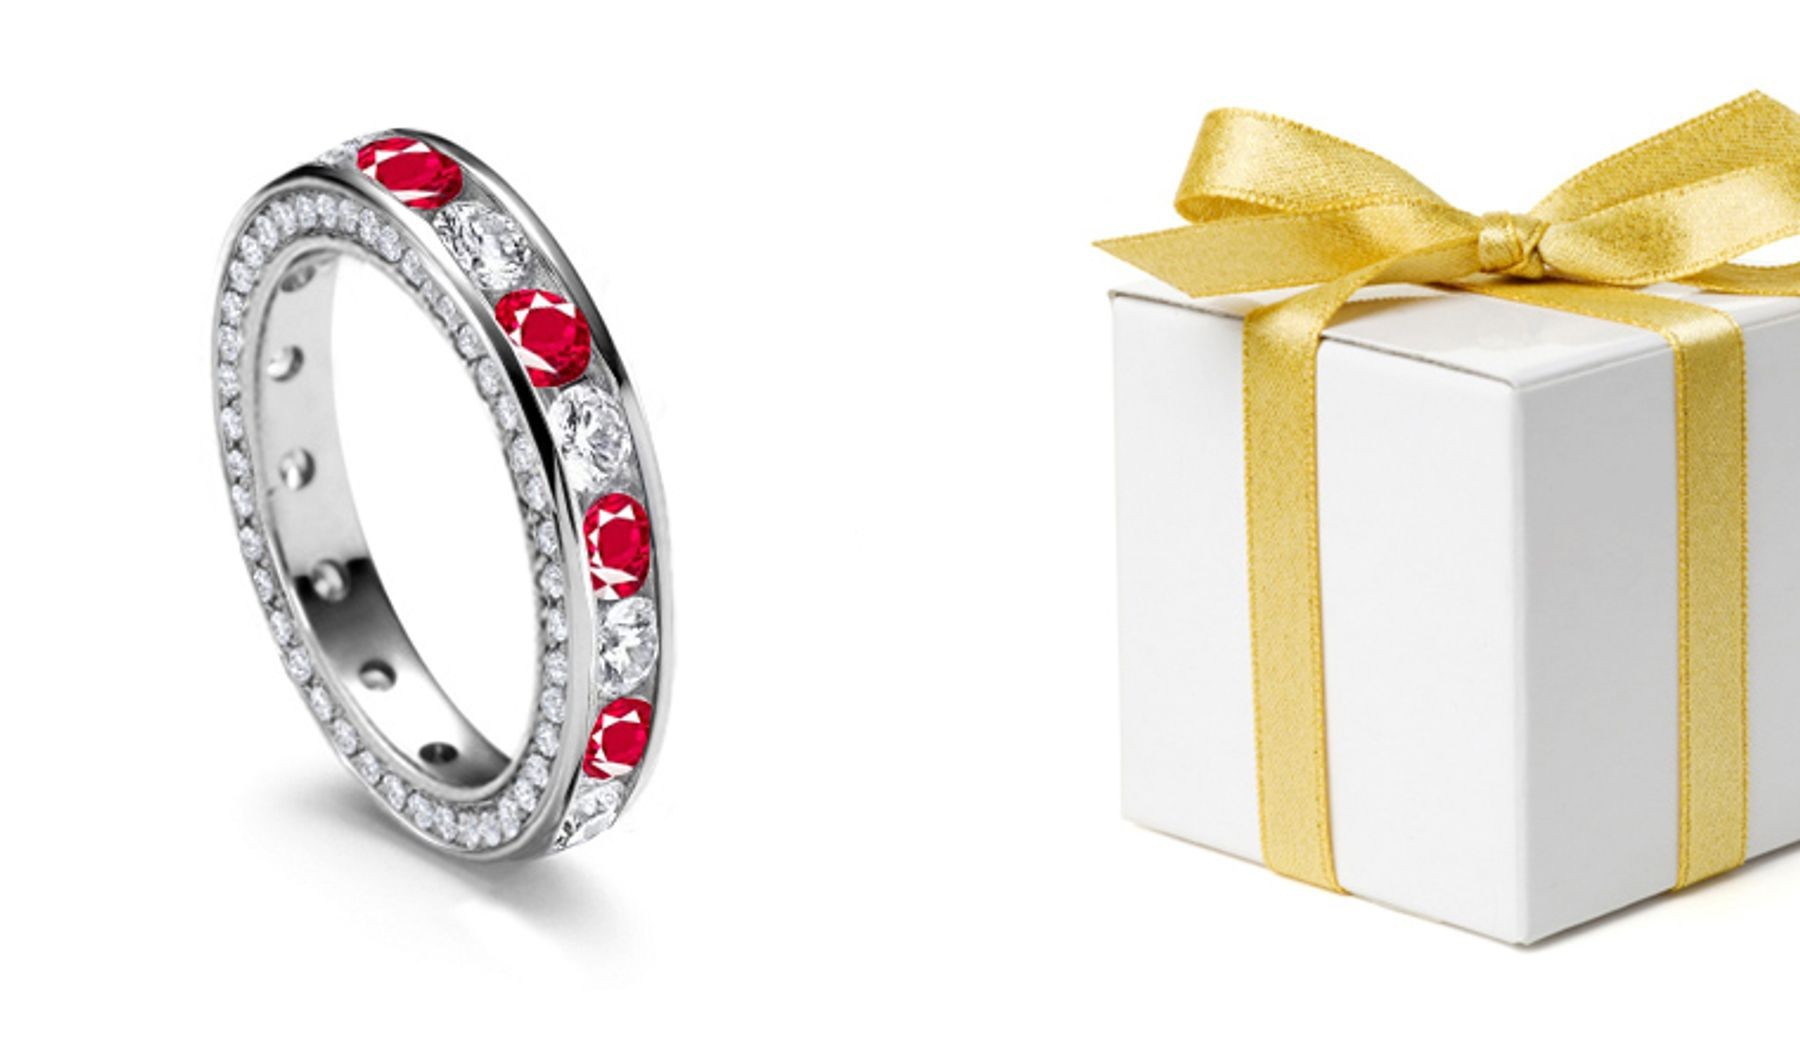 Celebrating Eternal Love: Sparkling Round Diamond & Ruby Eternity Ring With Sides Decorated